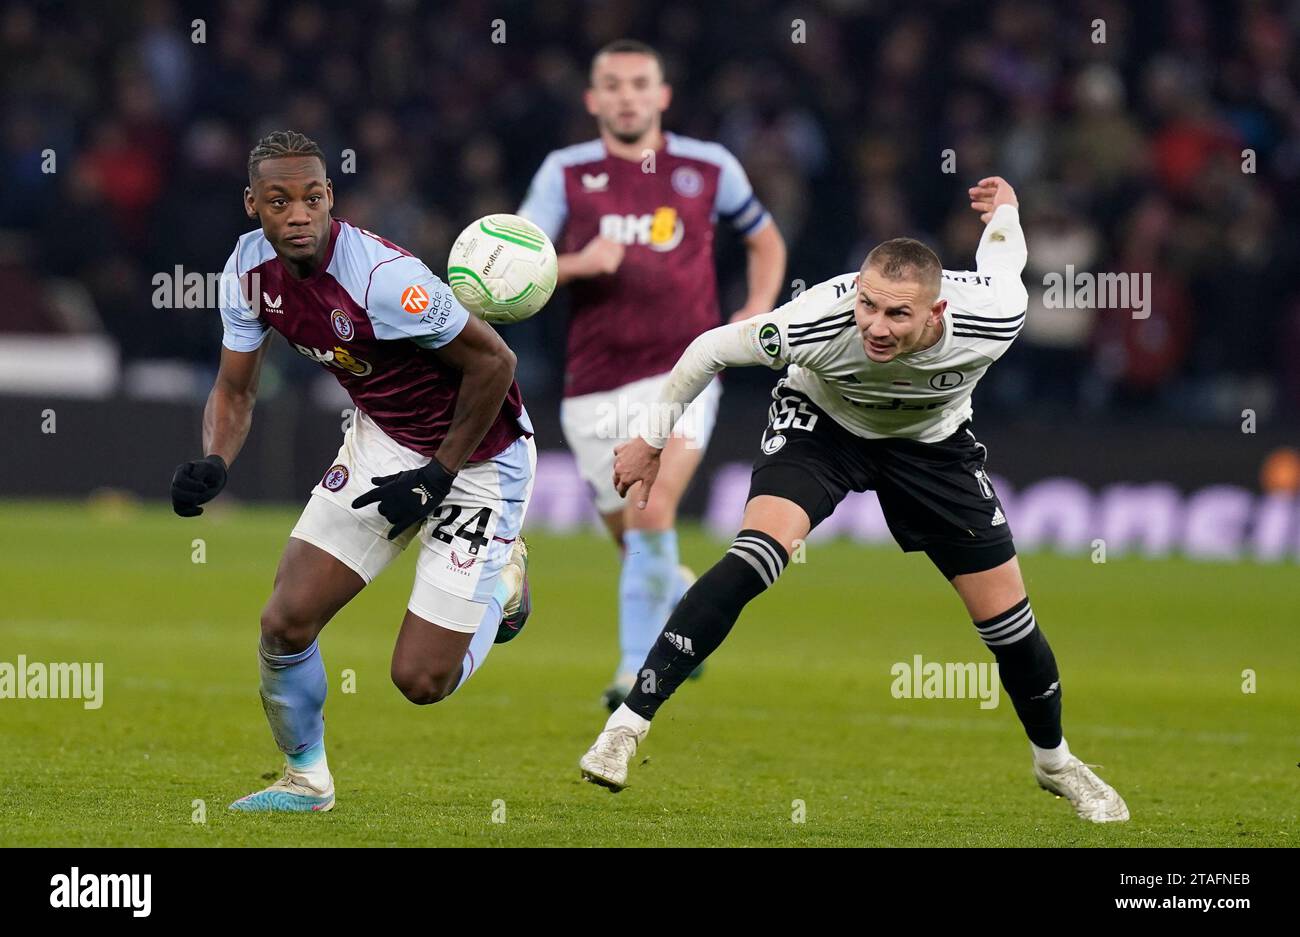 Birmingham, UK. 30th Nov, 2023. Jhon Duran of Aston Villa (L) is challenged by Artur Jędrzejczyk of Legia Warsaw during the UEFA Europa Conference League match at Villa Park, Birmingham. Picture credit should read: Andrew Yates/Sportimage Credit: Sportimage Ltd/Alamy Live News Stock Photo